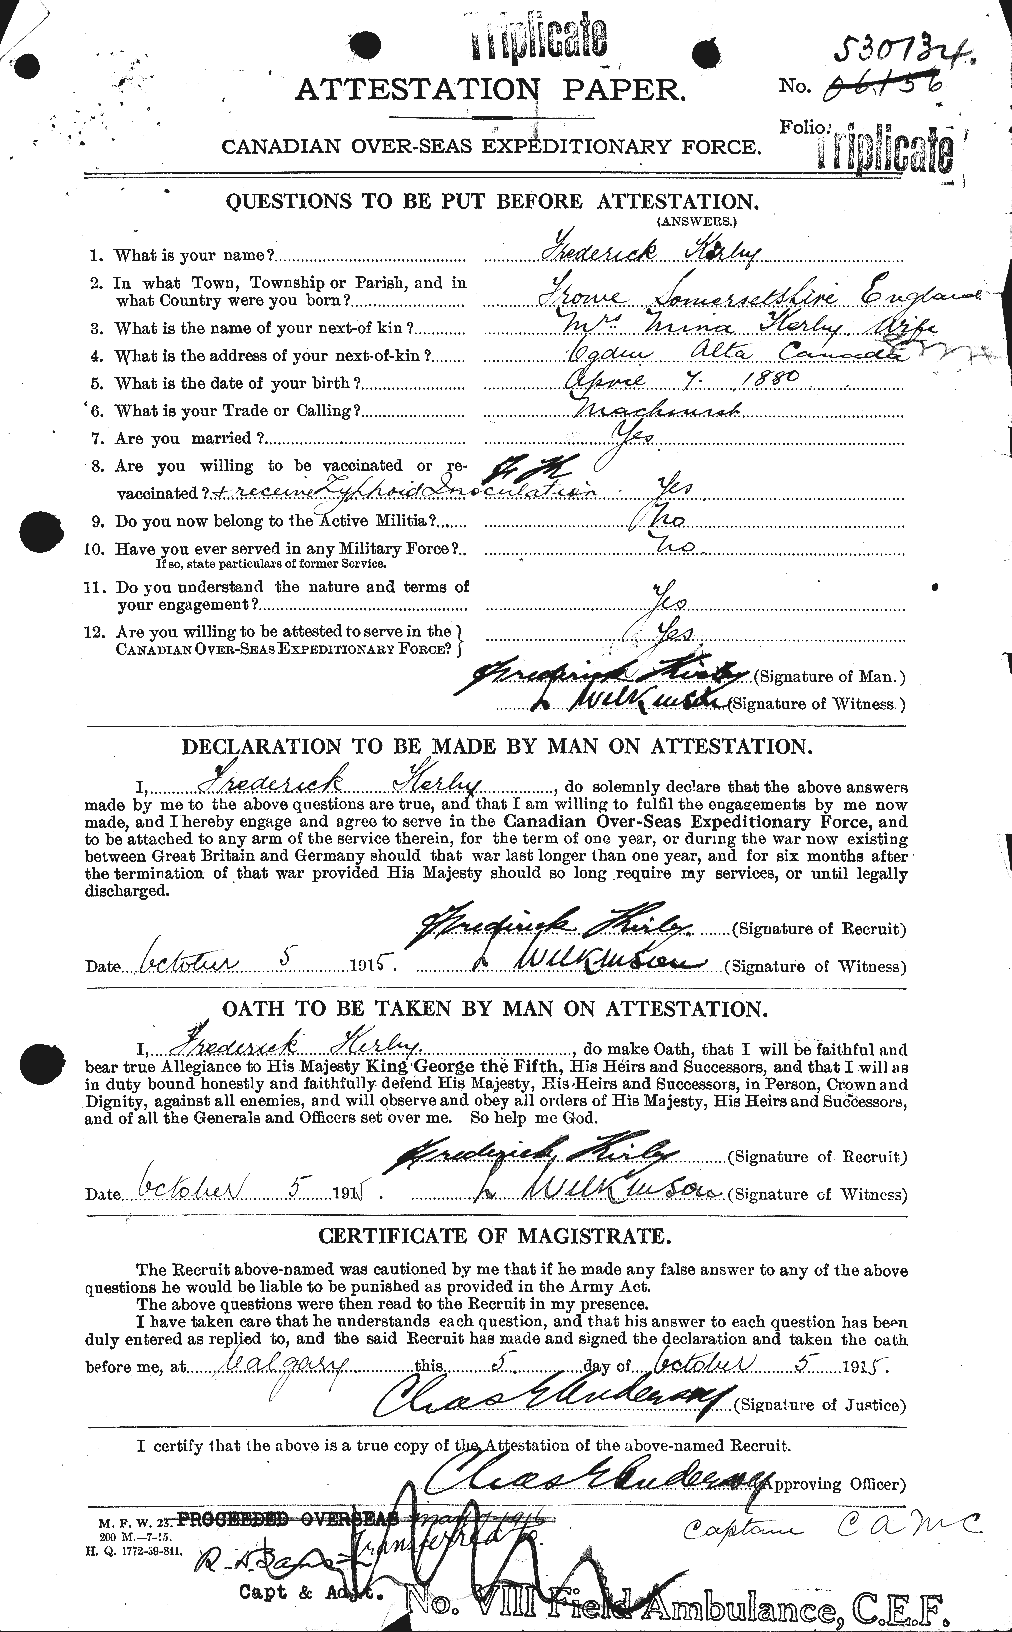 Personnel Records of the First World War - CEF 437187a